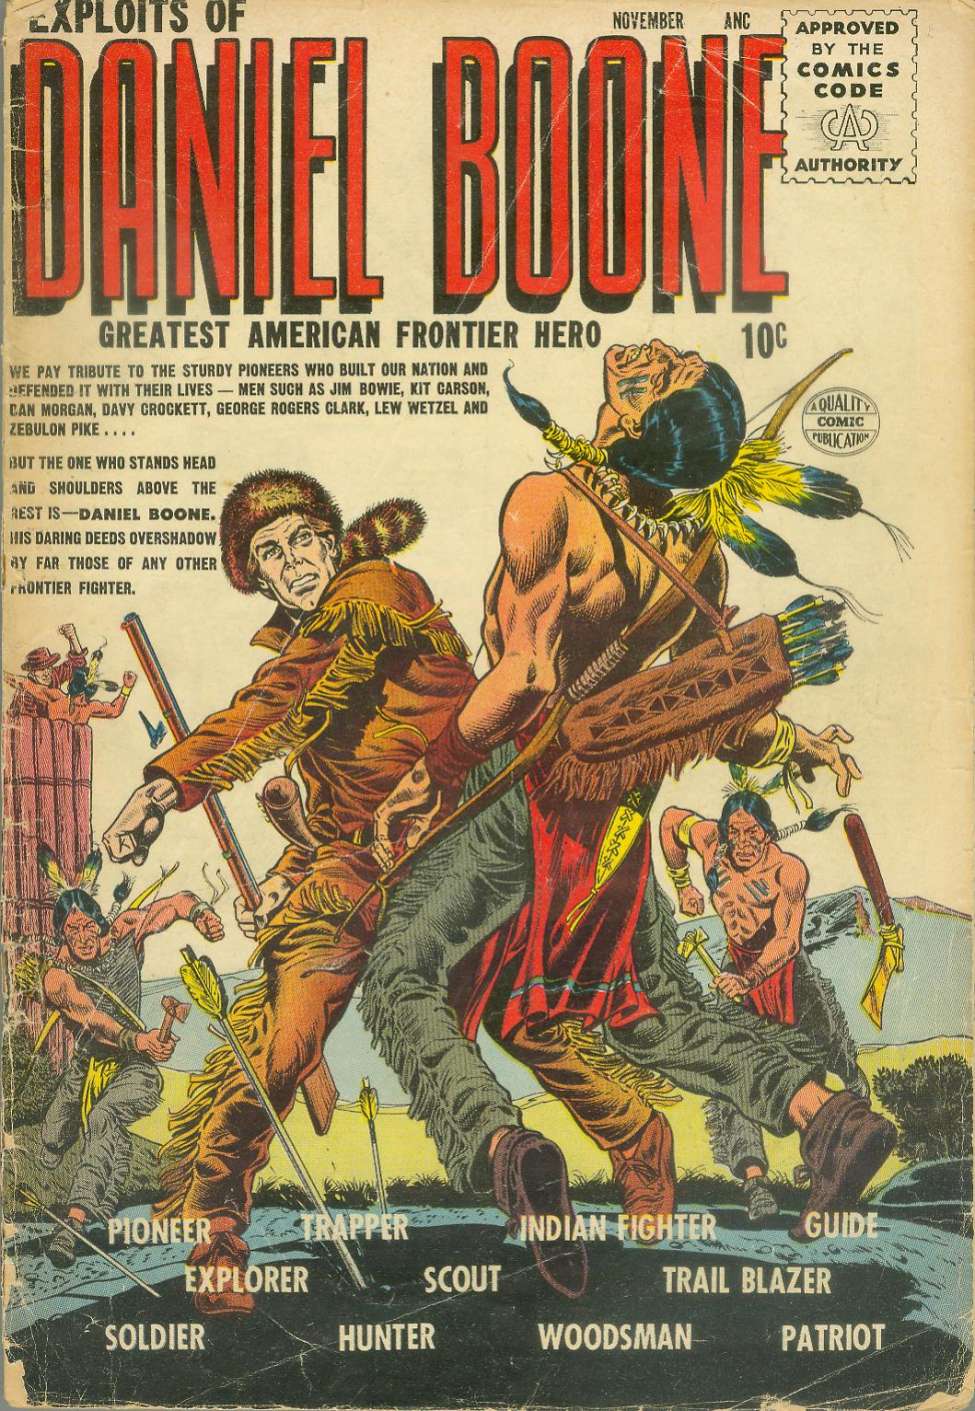 Book Cover For Exploits of Daniel Boone 1